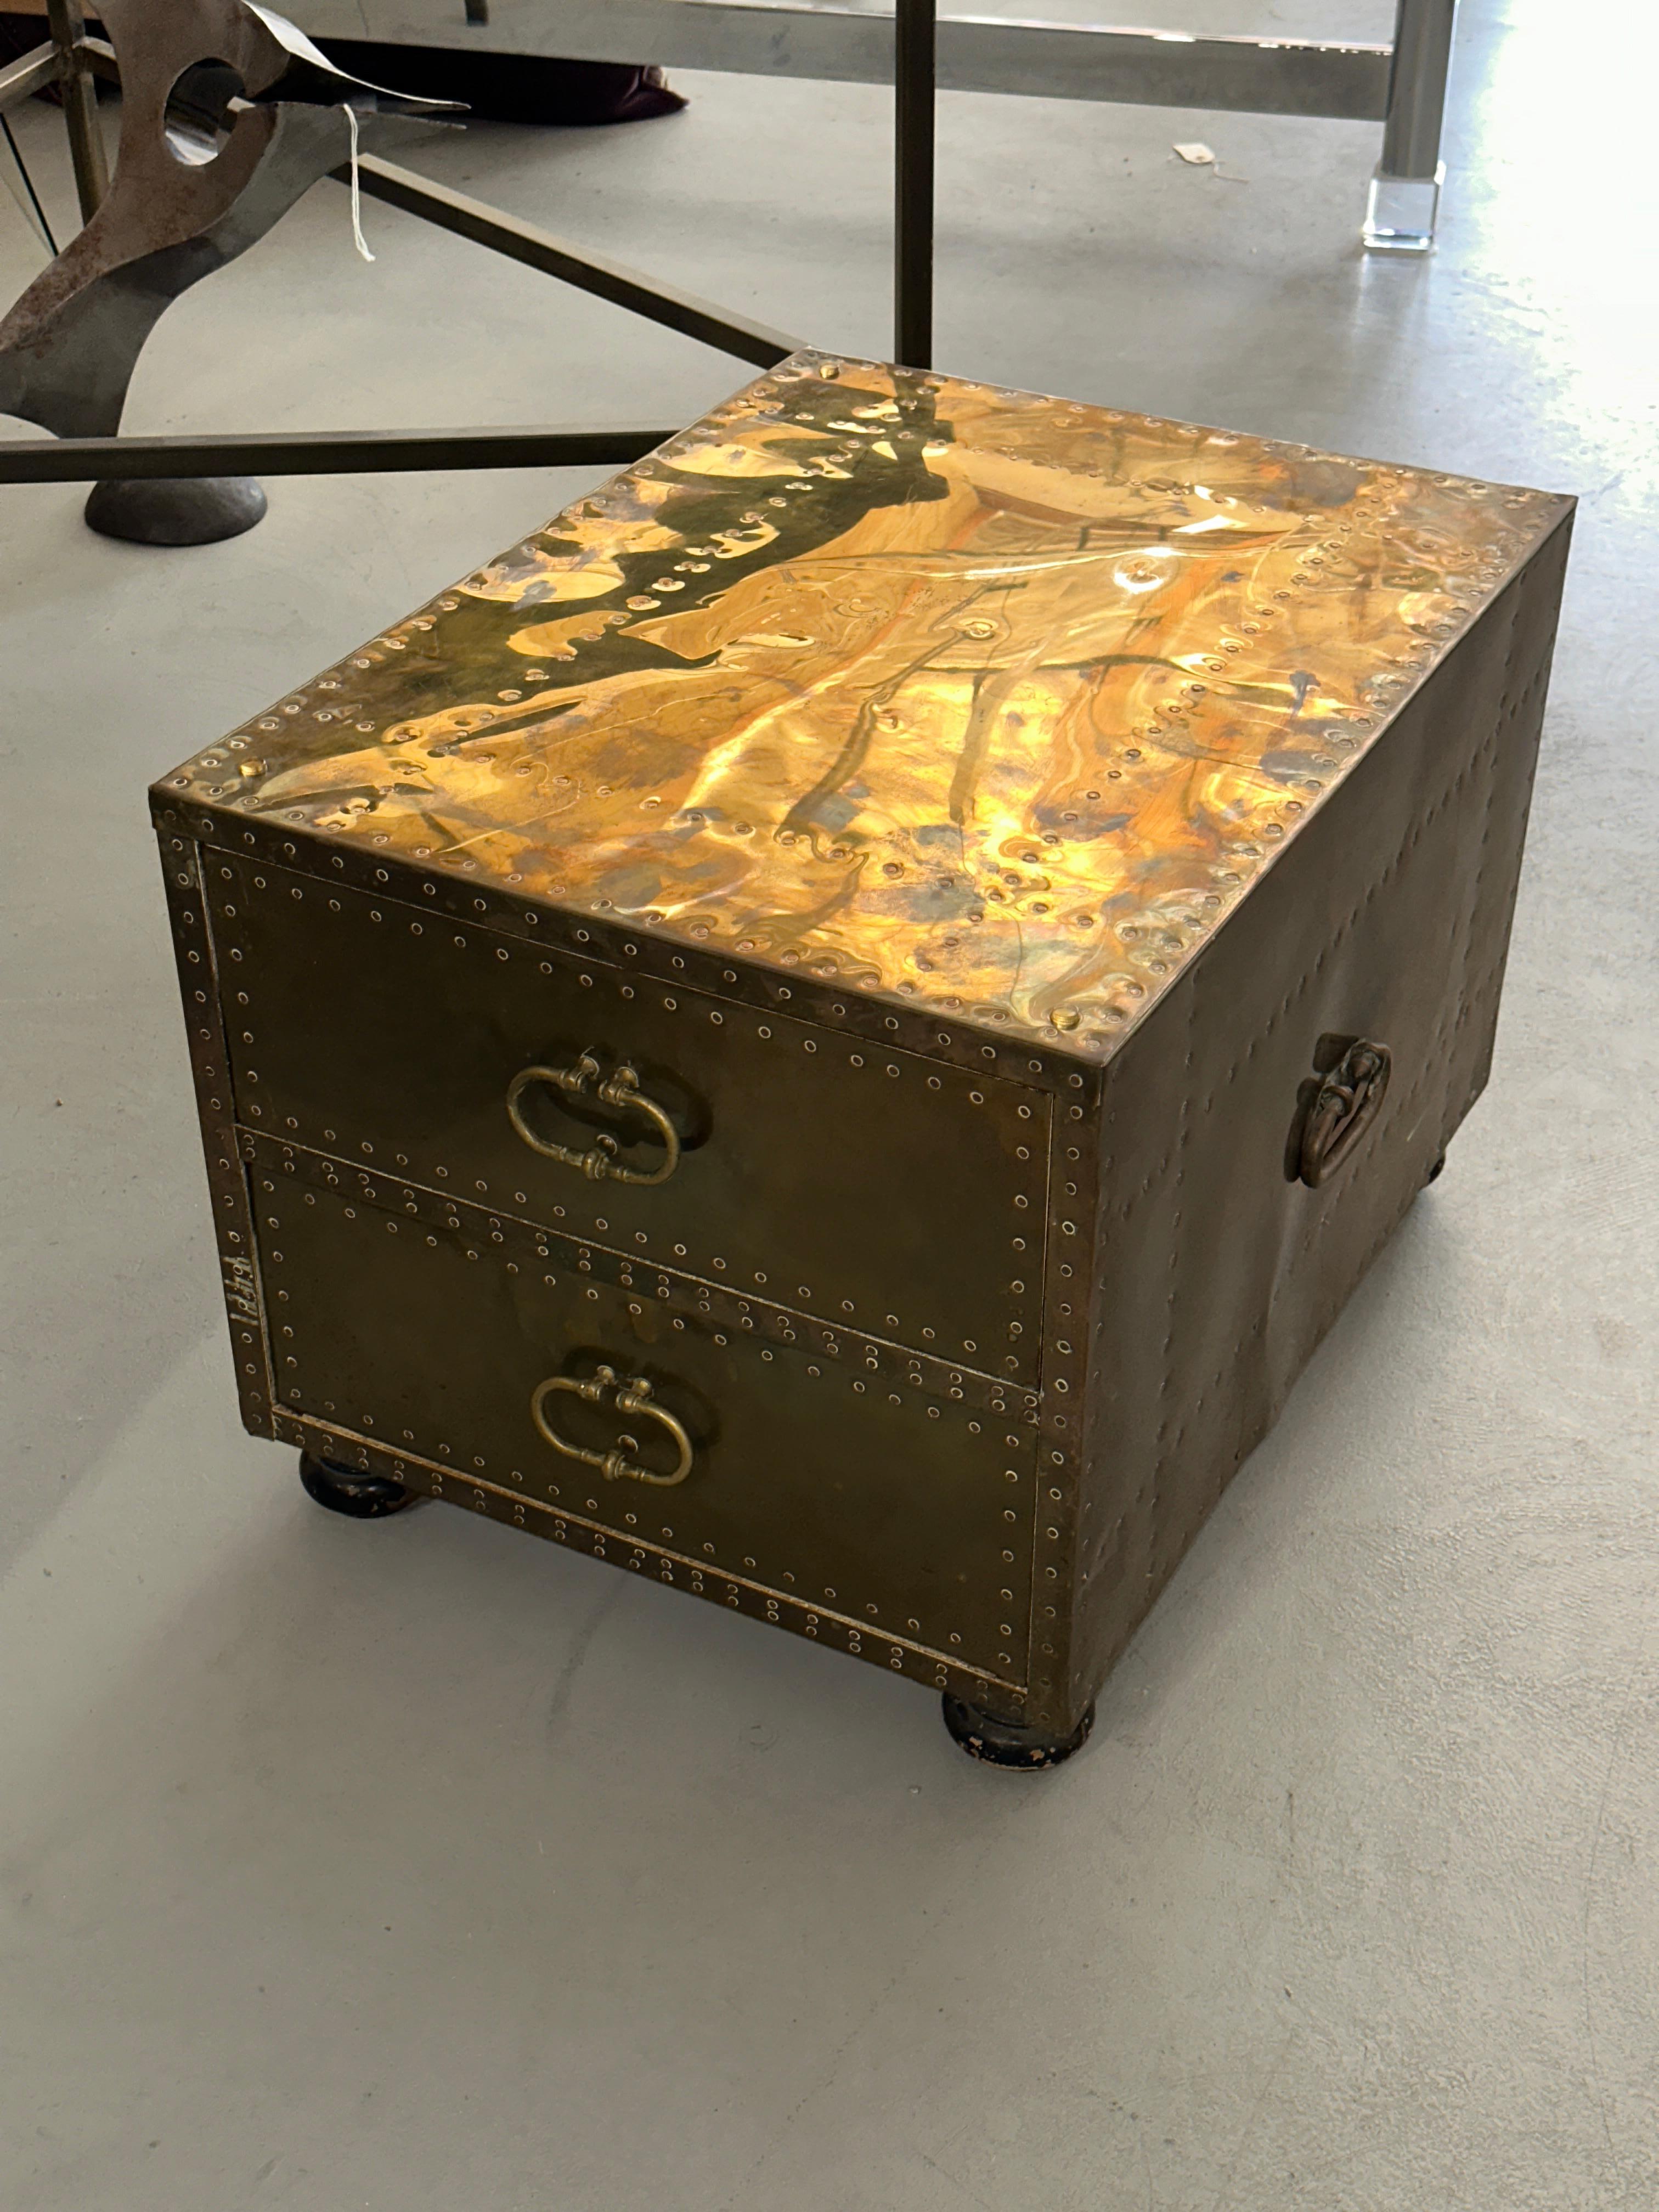 Beautifully worn and patinated brass clad 2 drawer chest or side table by Sarreid Ltd of Spain. Nicely crafted with 2 front facing drawers and handles on the sides. Can be used as an end / side table or as a nightstand in a bedroom. The patination